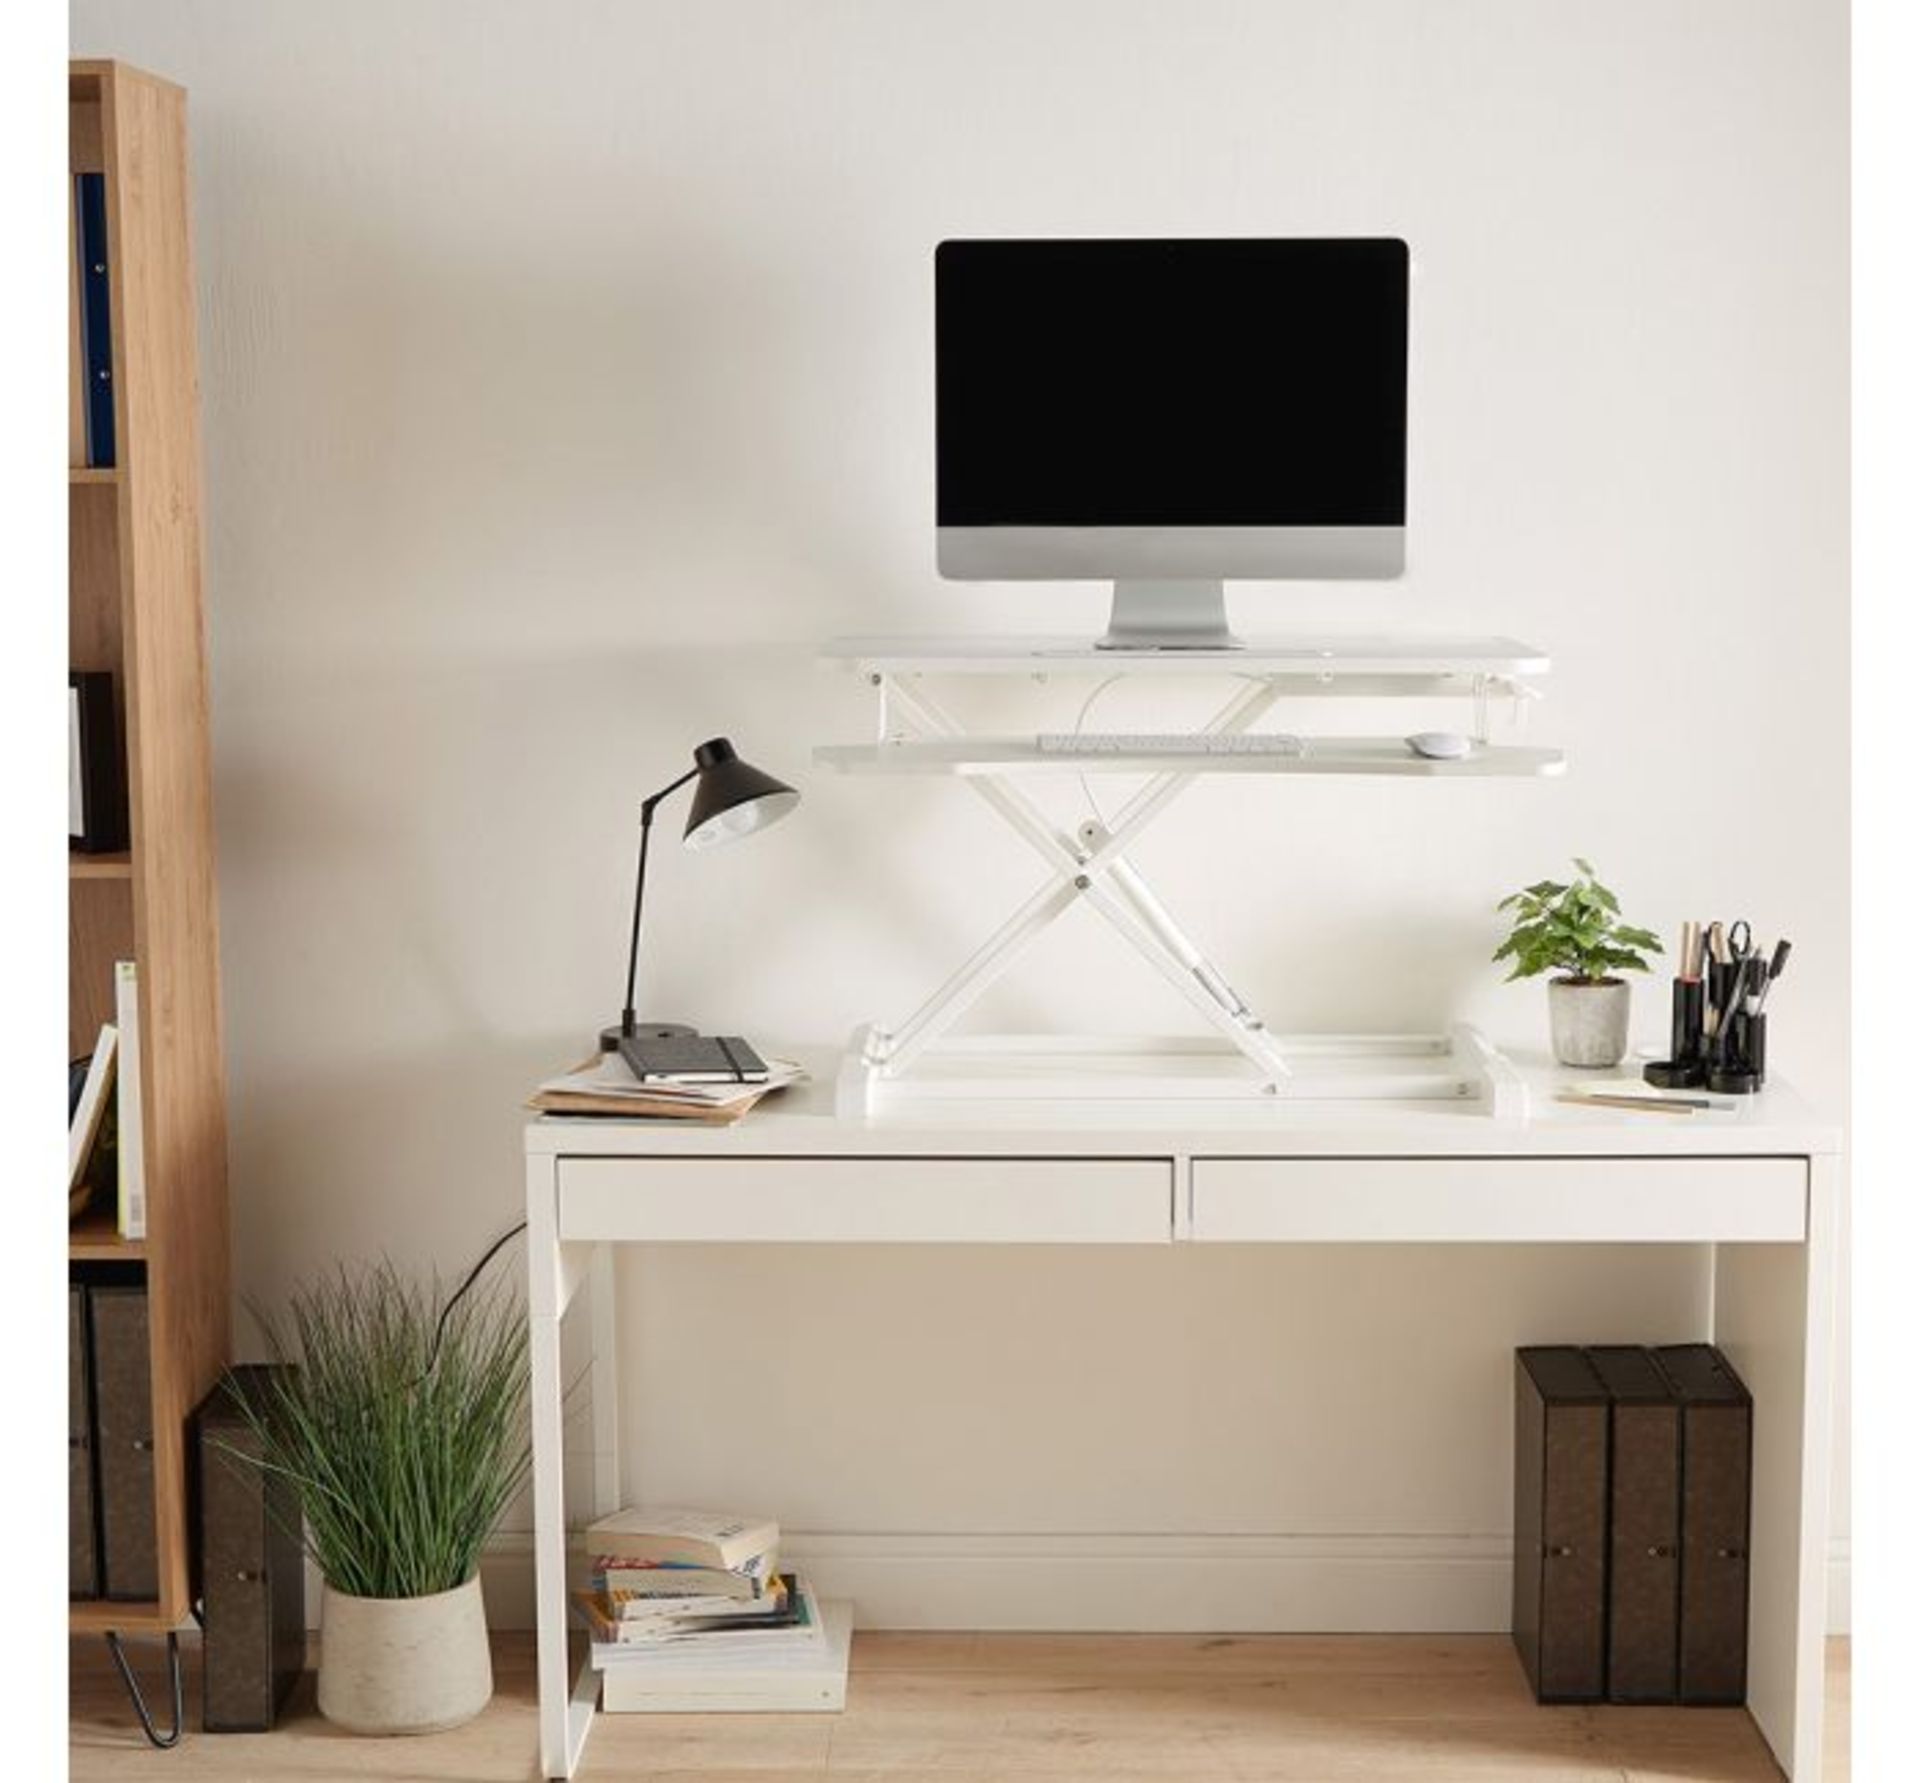 (HZ83) Sit/Stand Rising Workstation – White Sits securely atop your desk with quick change b...